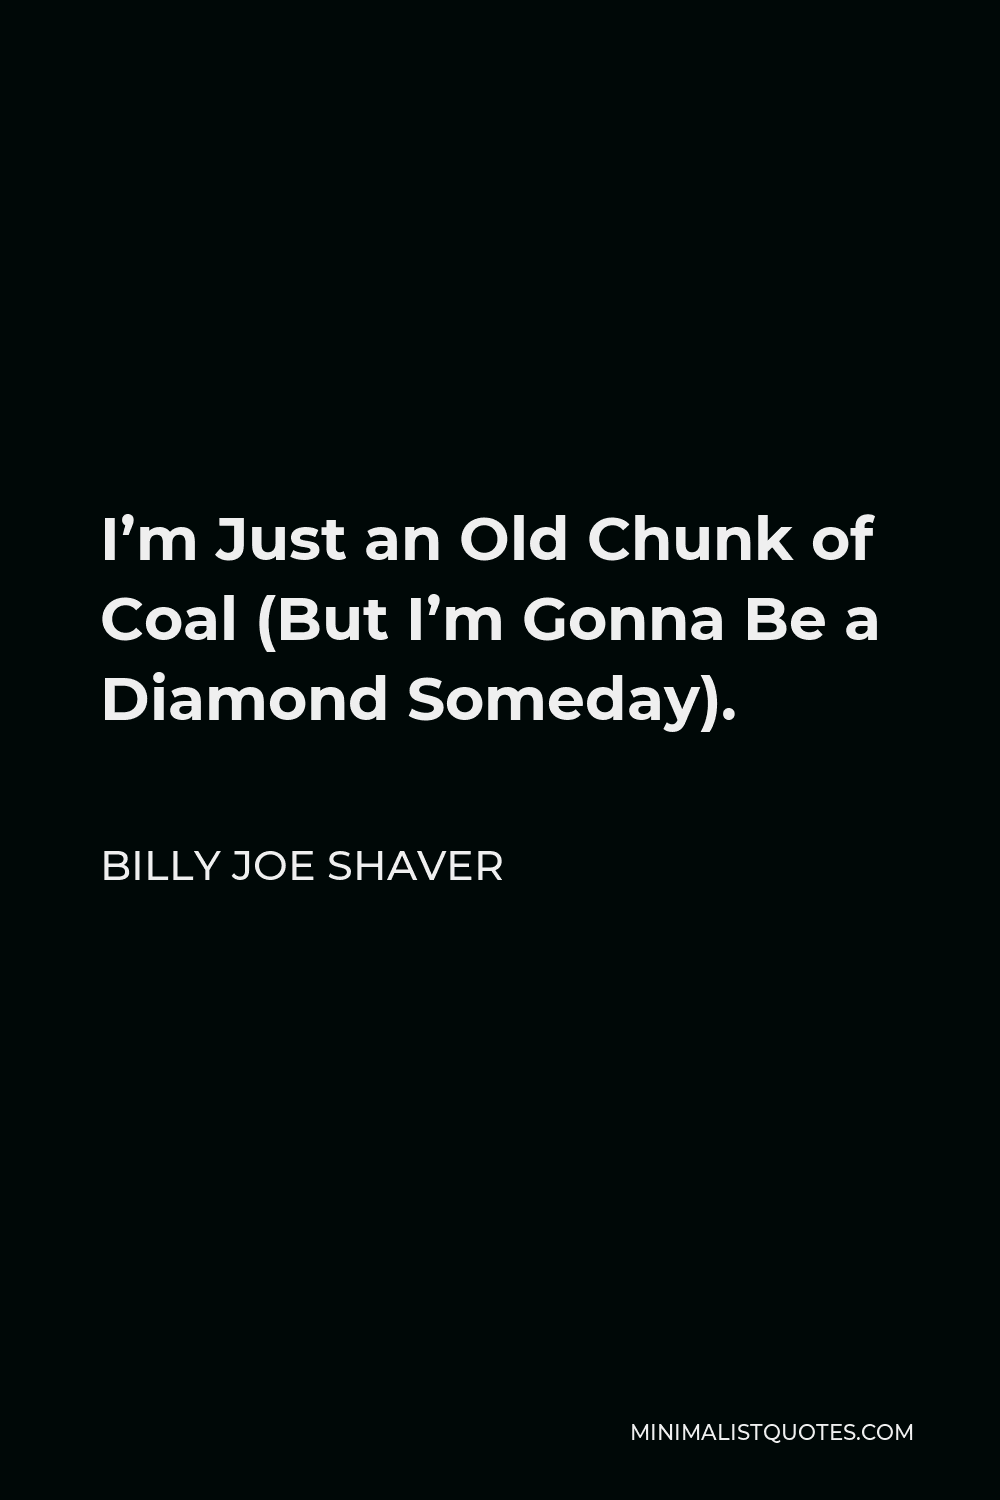 Billy Joe Shaver Quote - I’m Just an Old Chunk of Coal (But I’m Gonna Be a Diamond Someday).